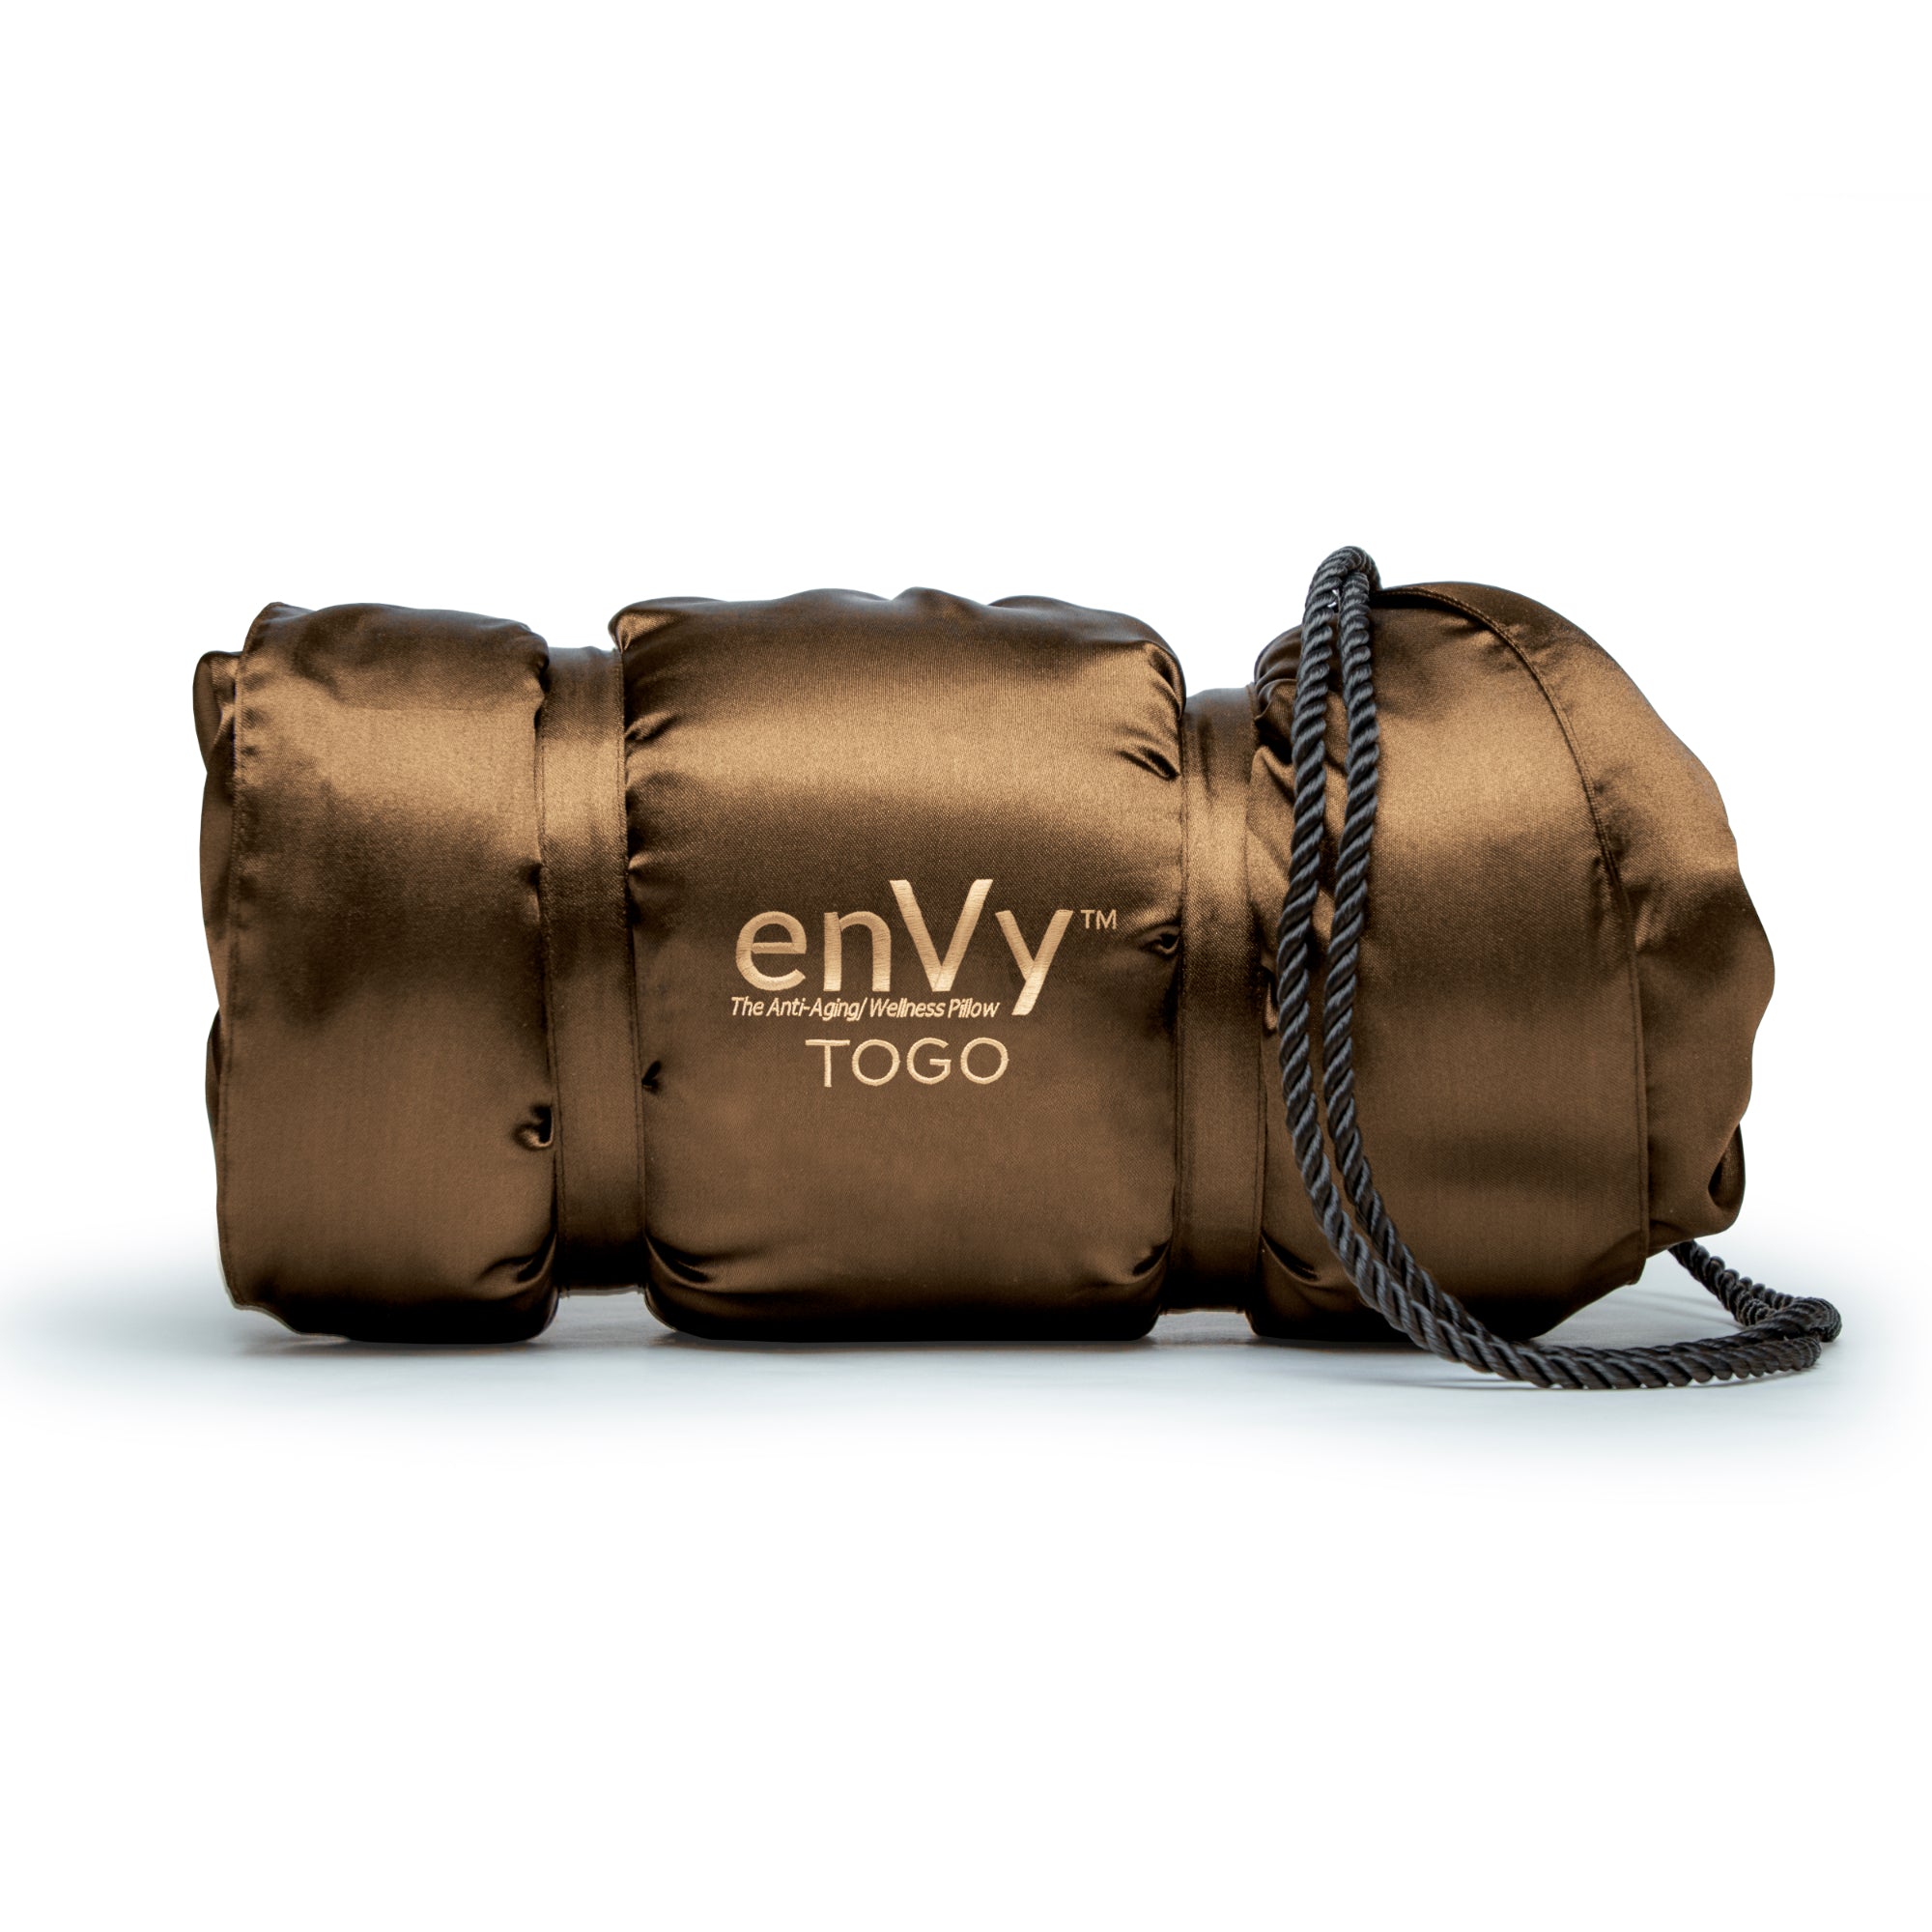 enVy® TO GO 100% Natural Latex Copper powered Travel Pillow (SILK Pillowcase Edition)